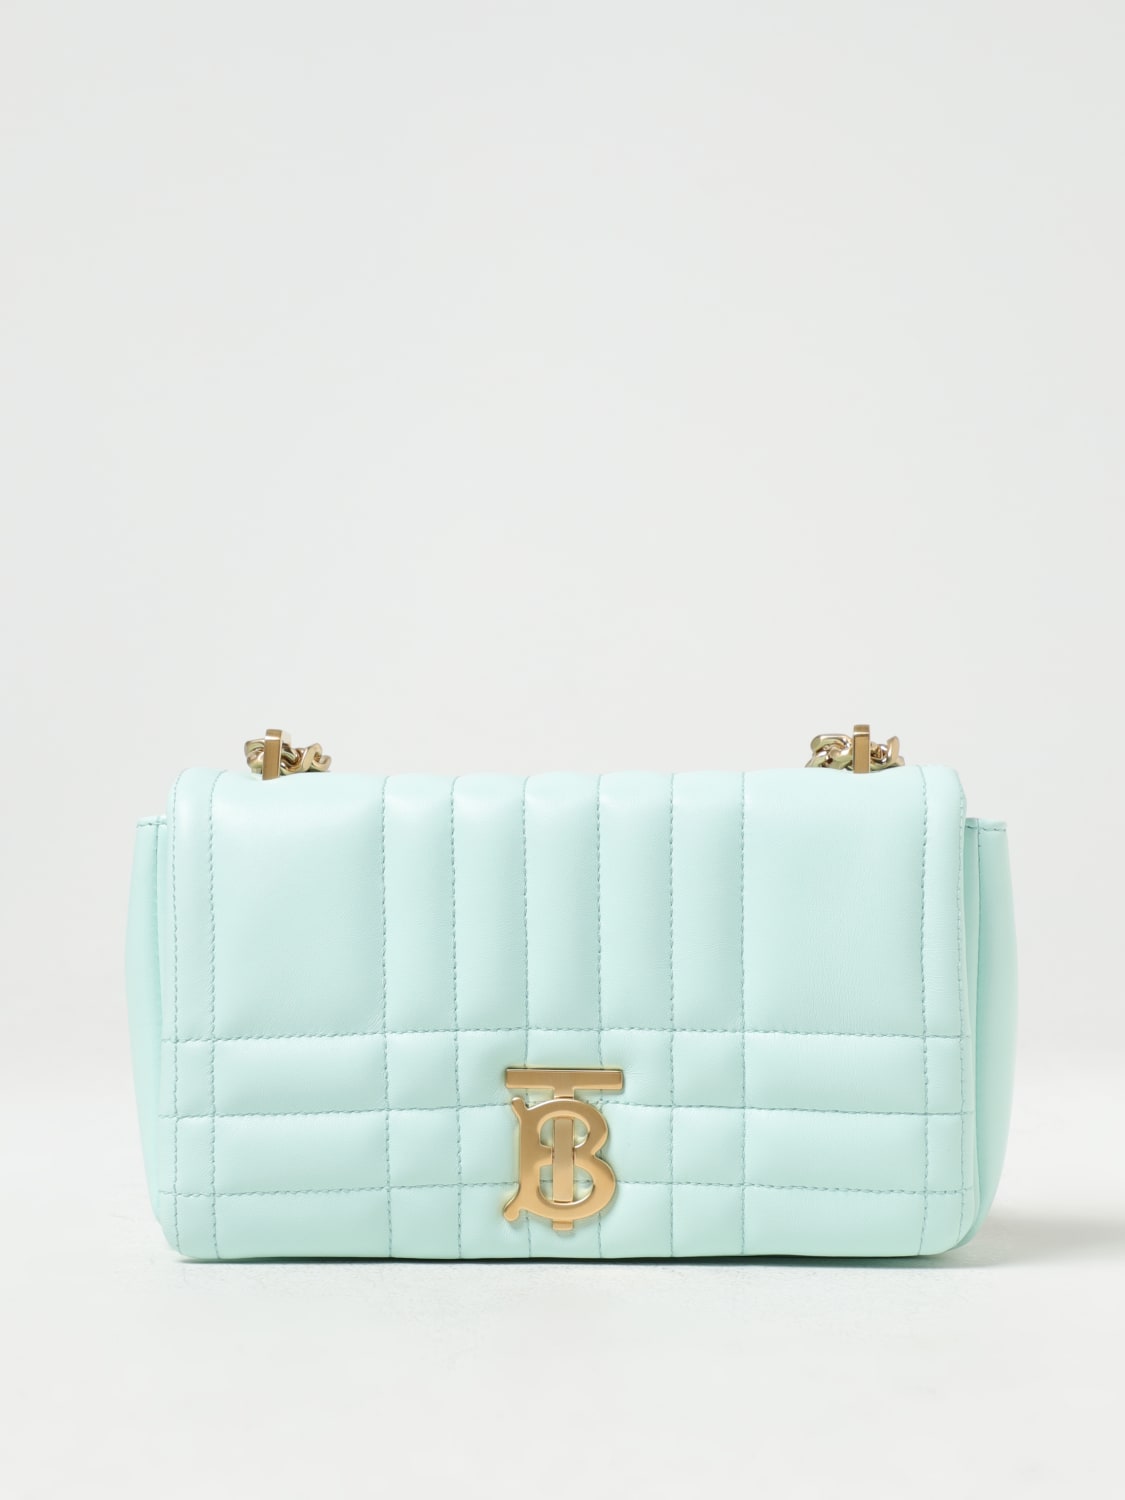 Green Lola quilted-leather cross-body bag, Burberry